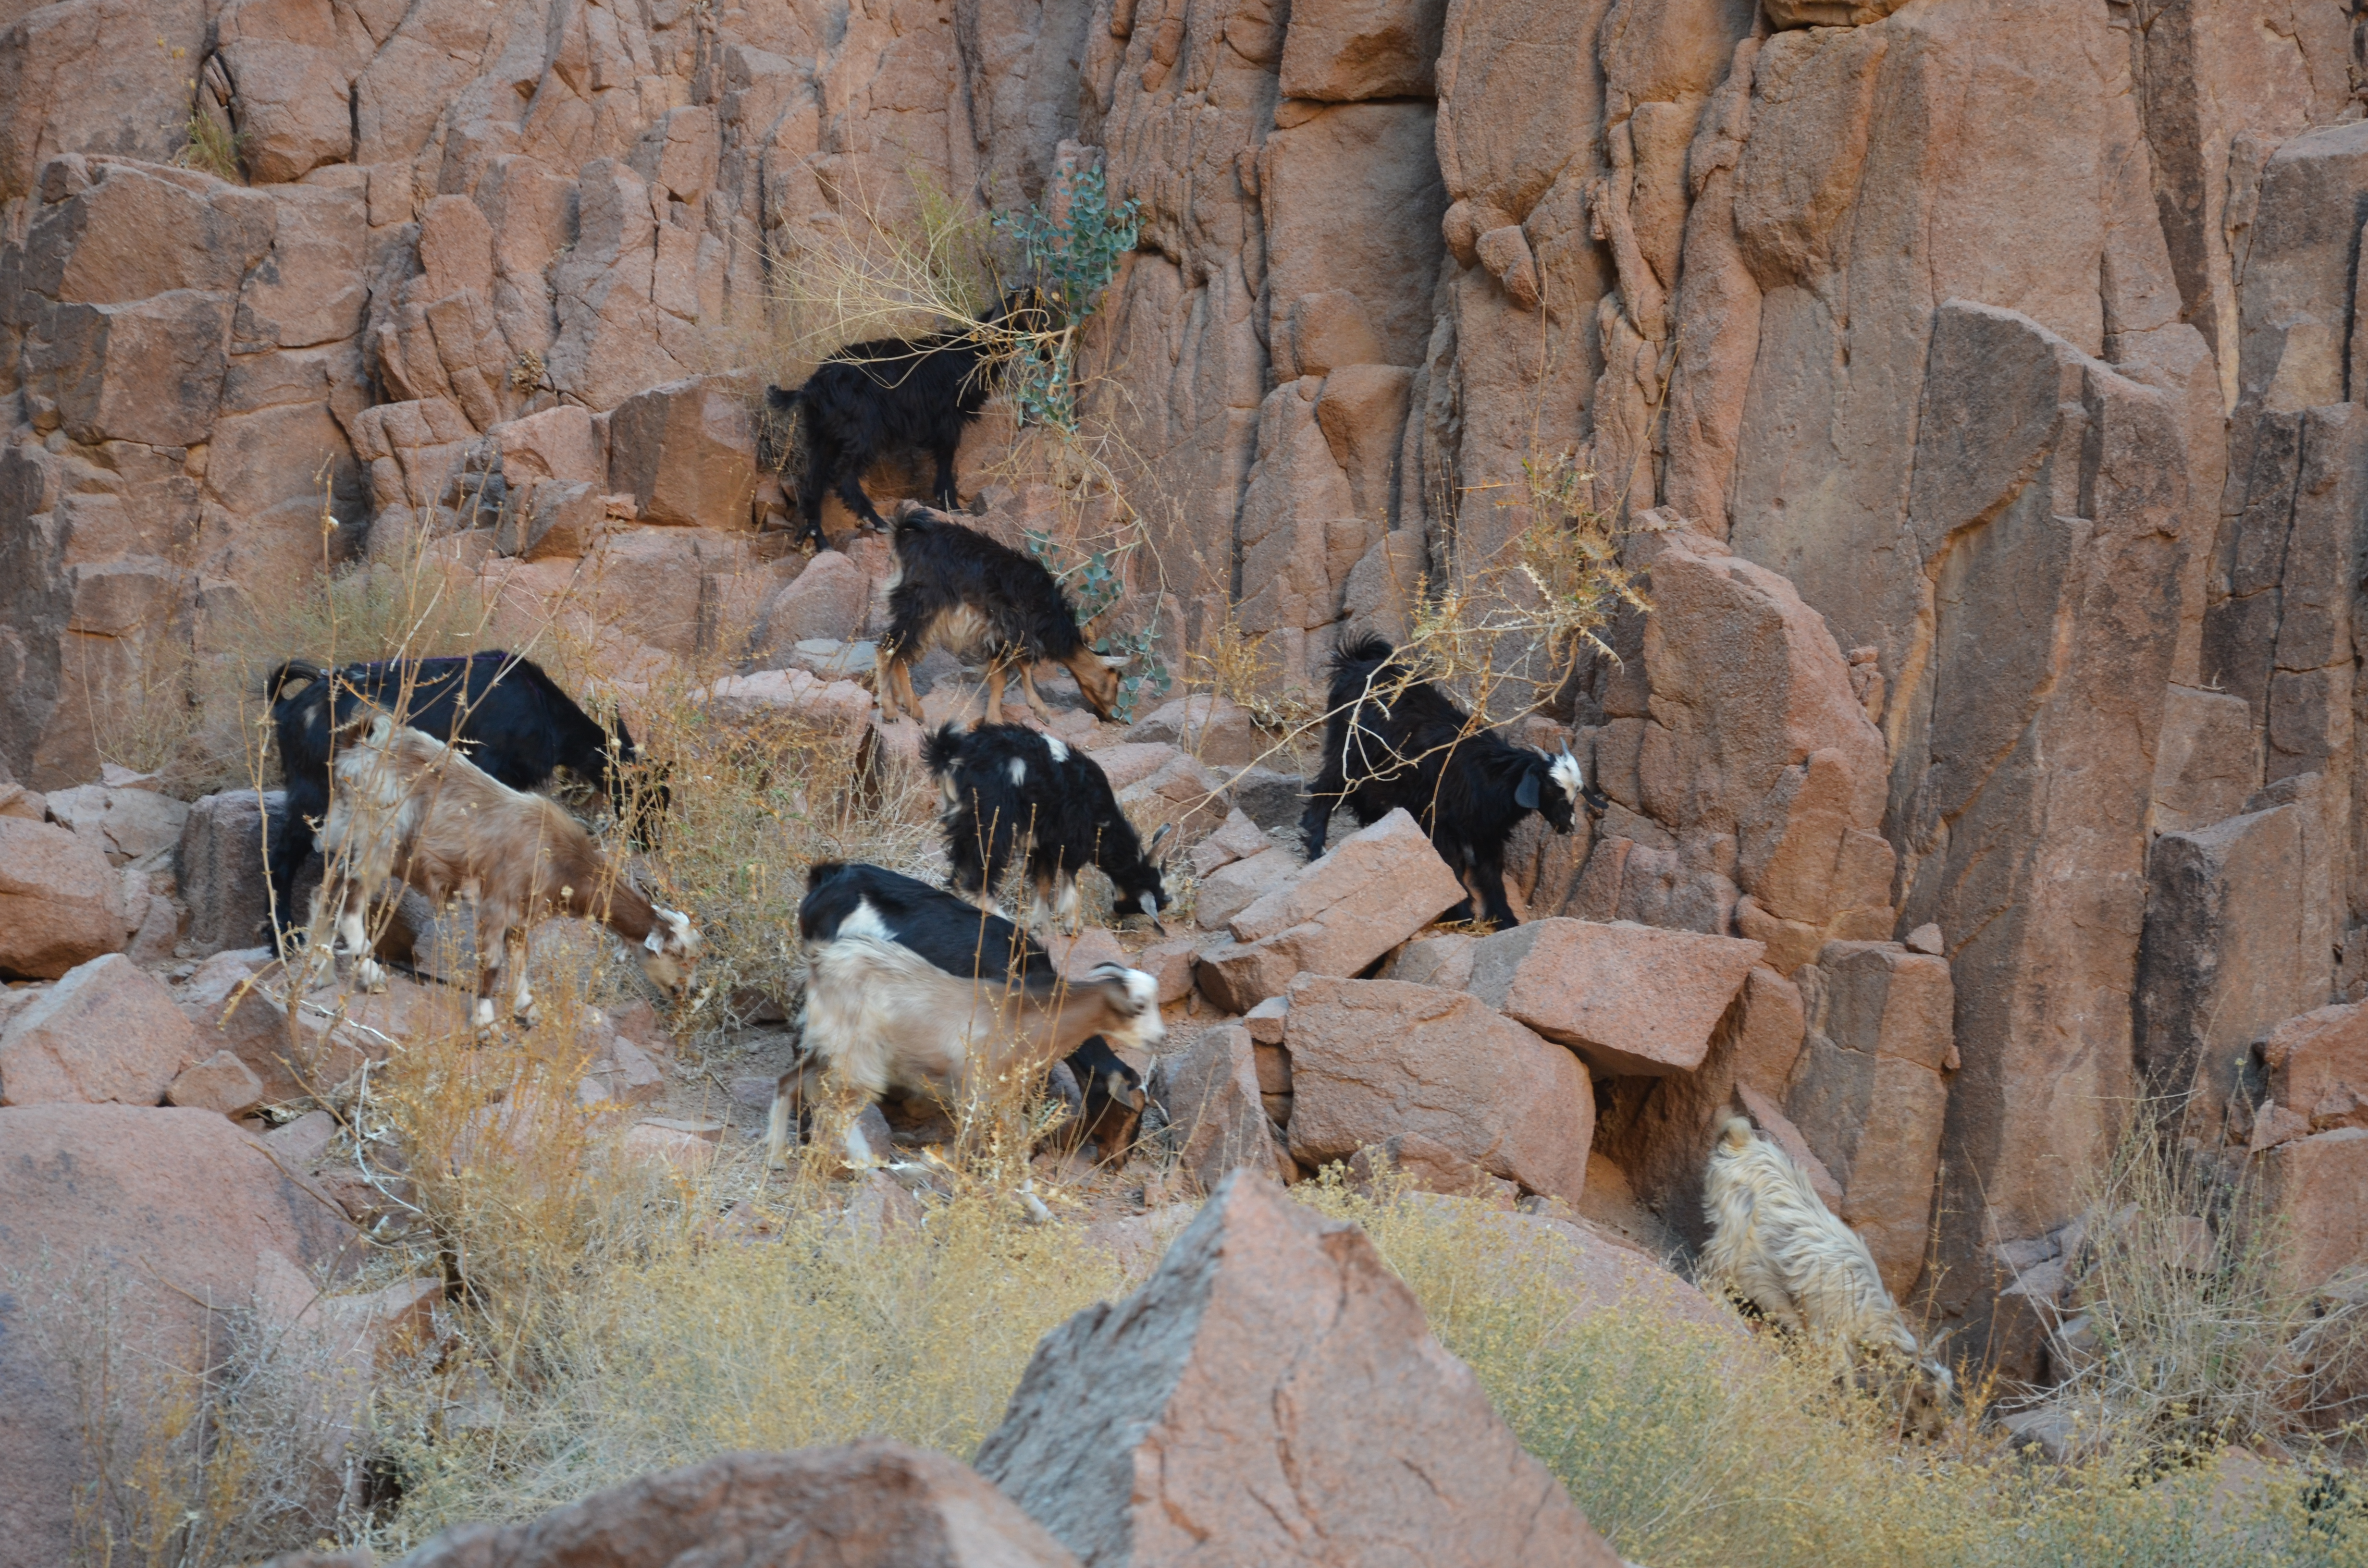 Pastoralism as a key tool for plant conservation: Creating conditions for adequate practices